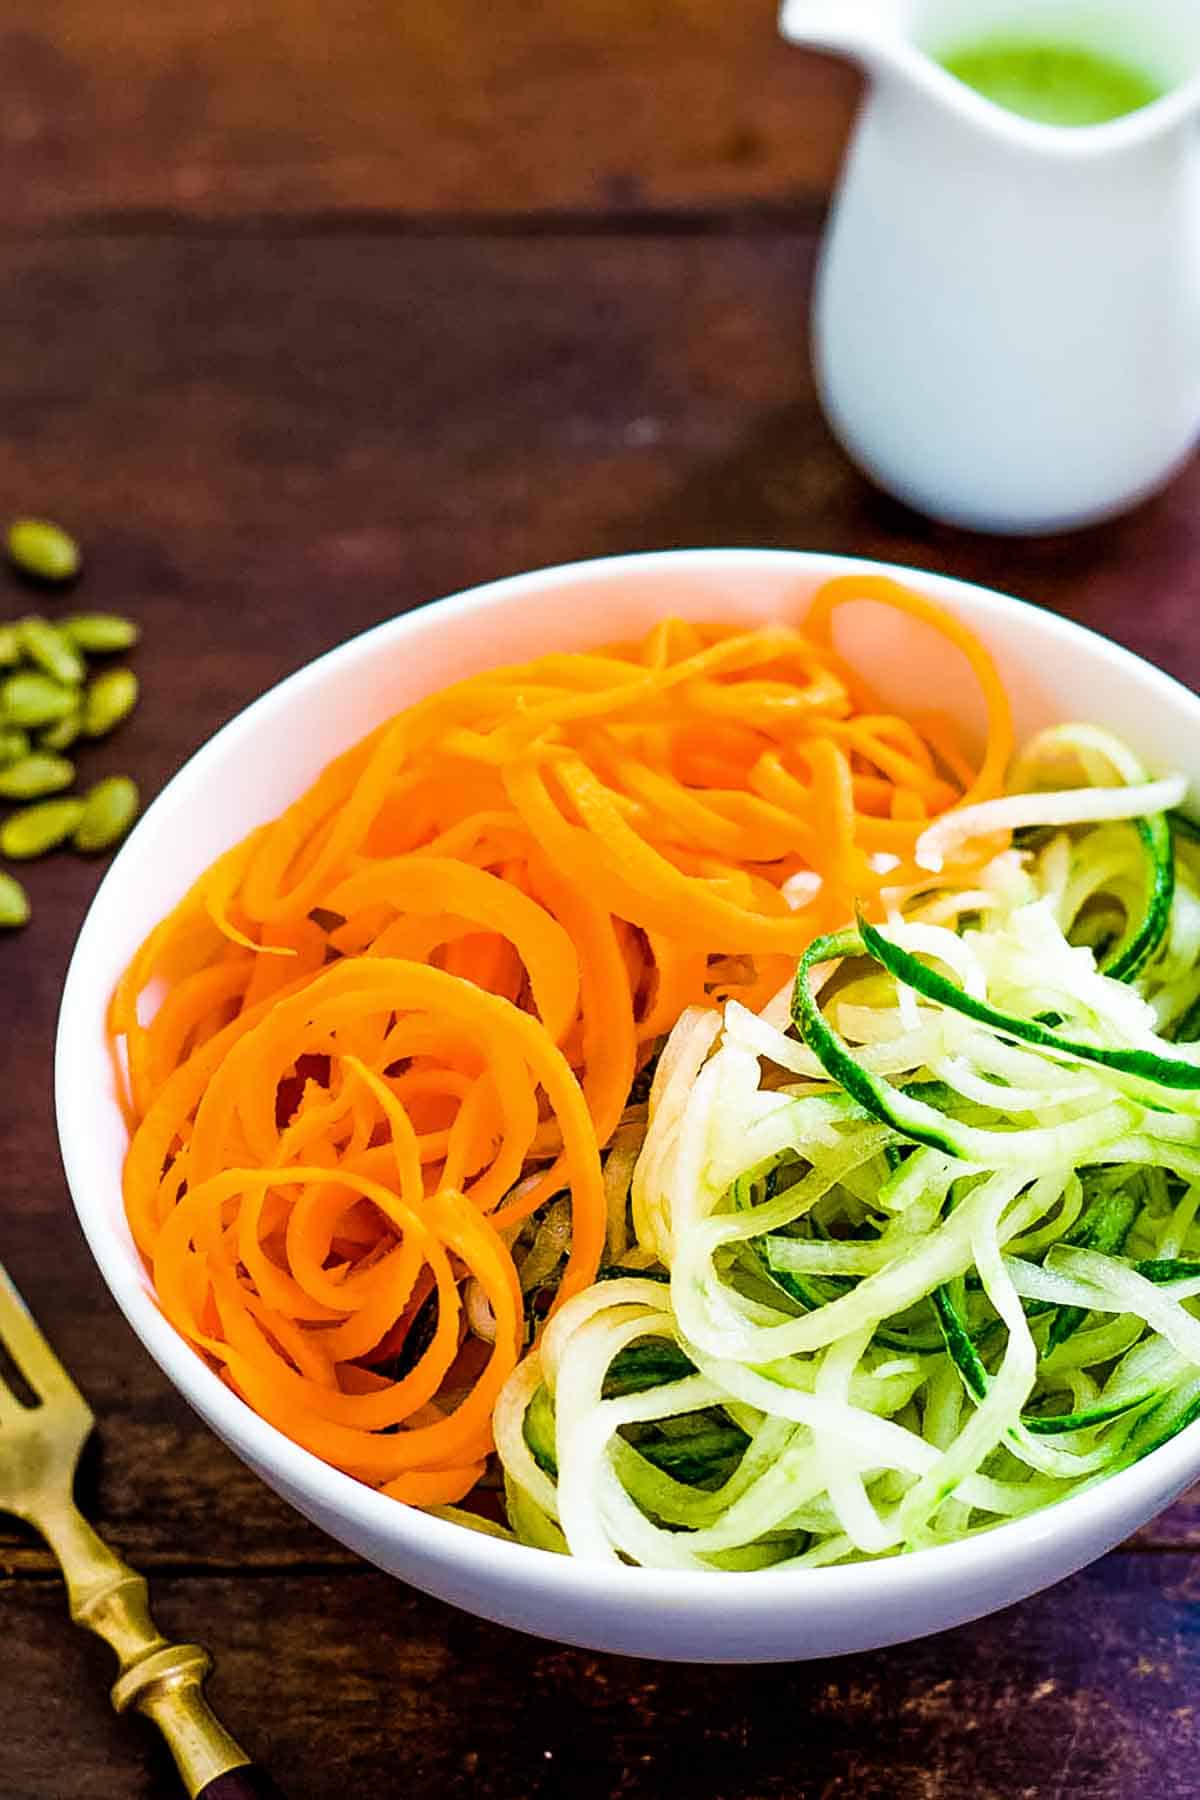 Carrot and cucumber strands in salad bowl